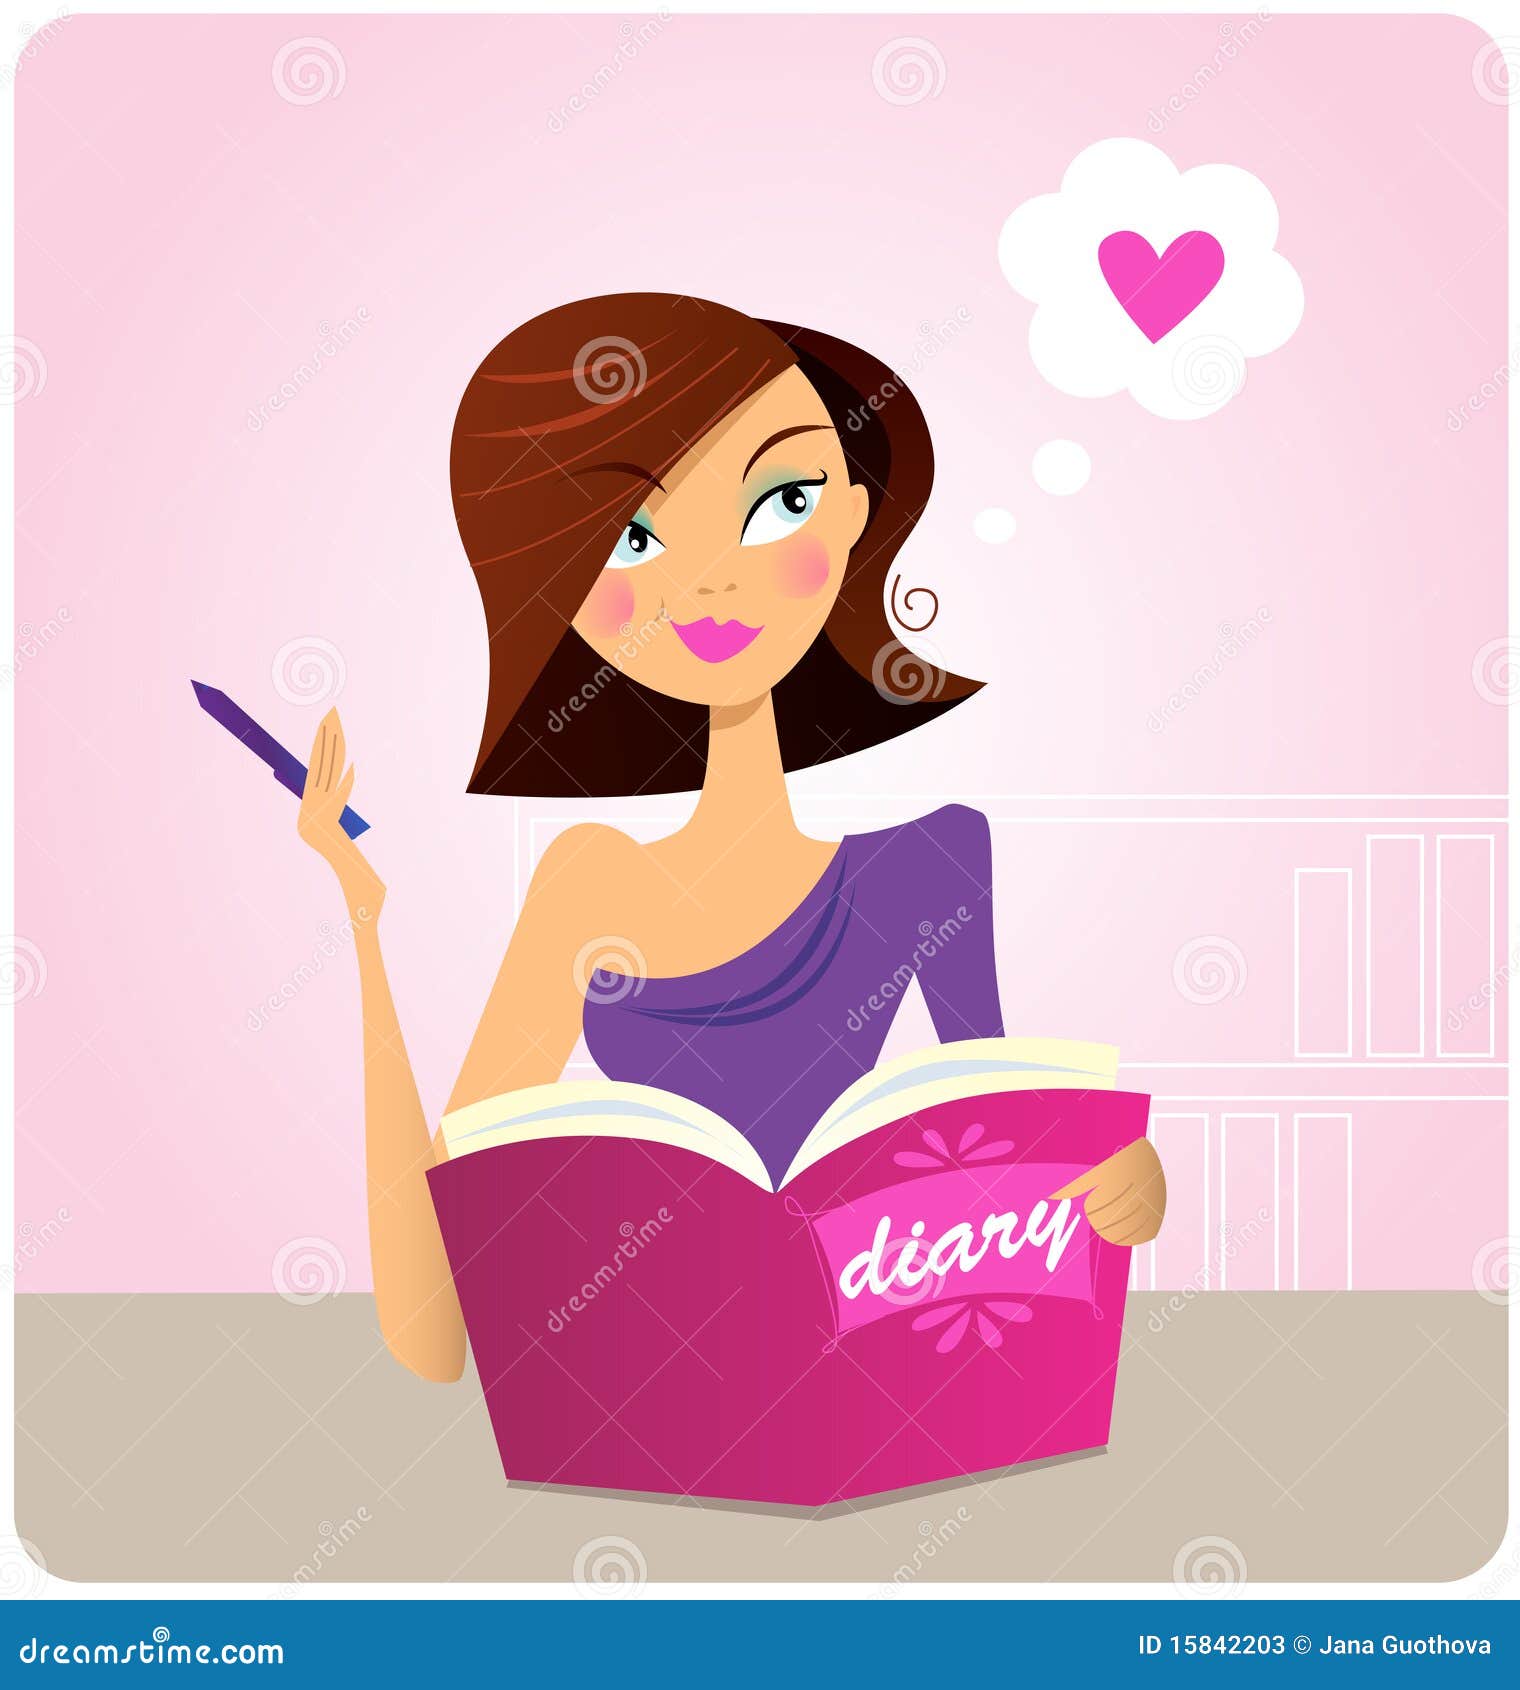 clipart of a girl writing - photo #12